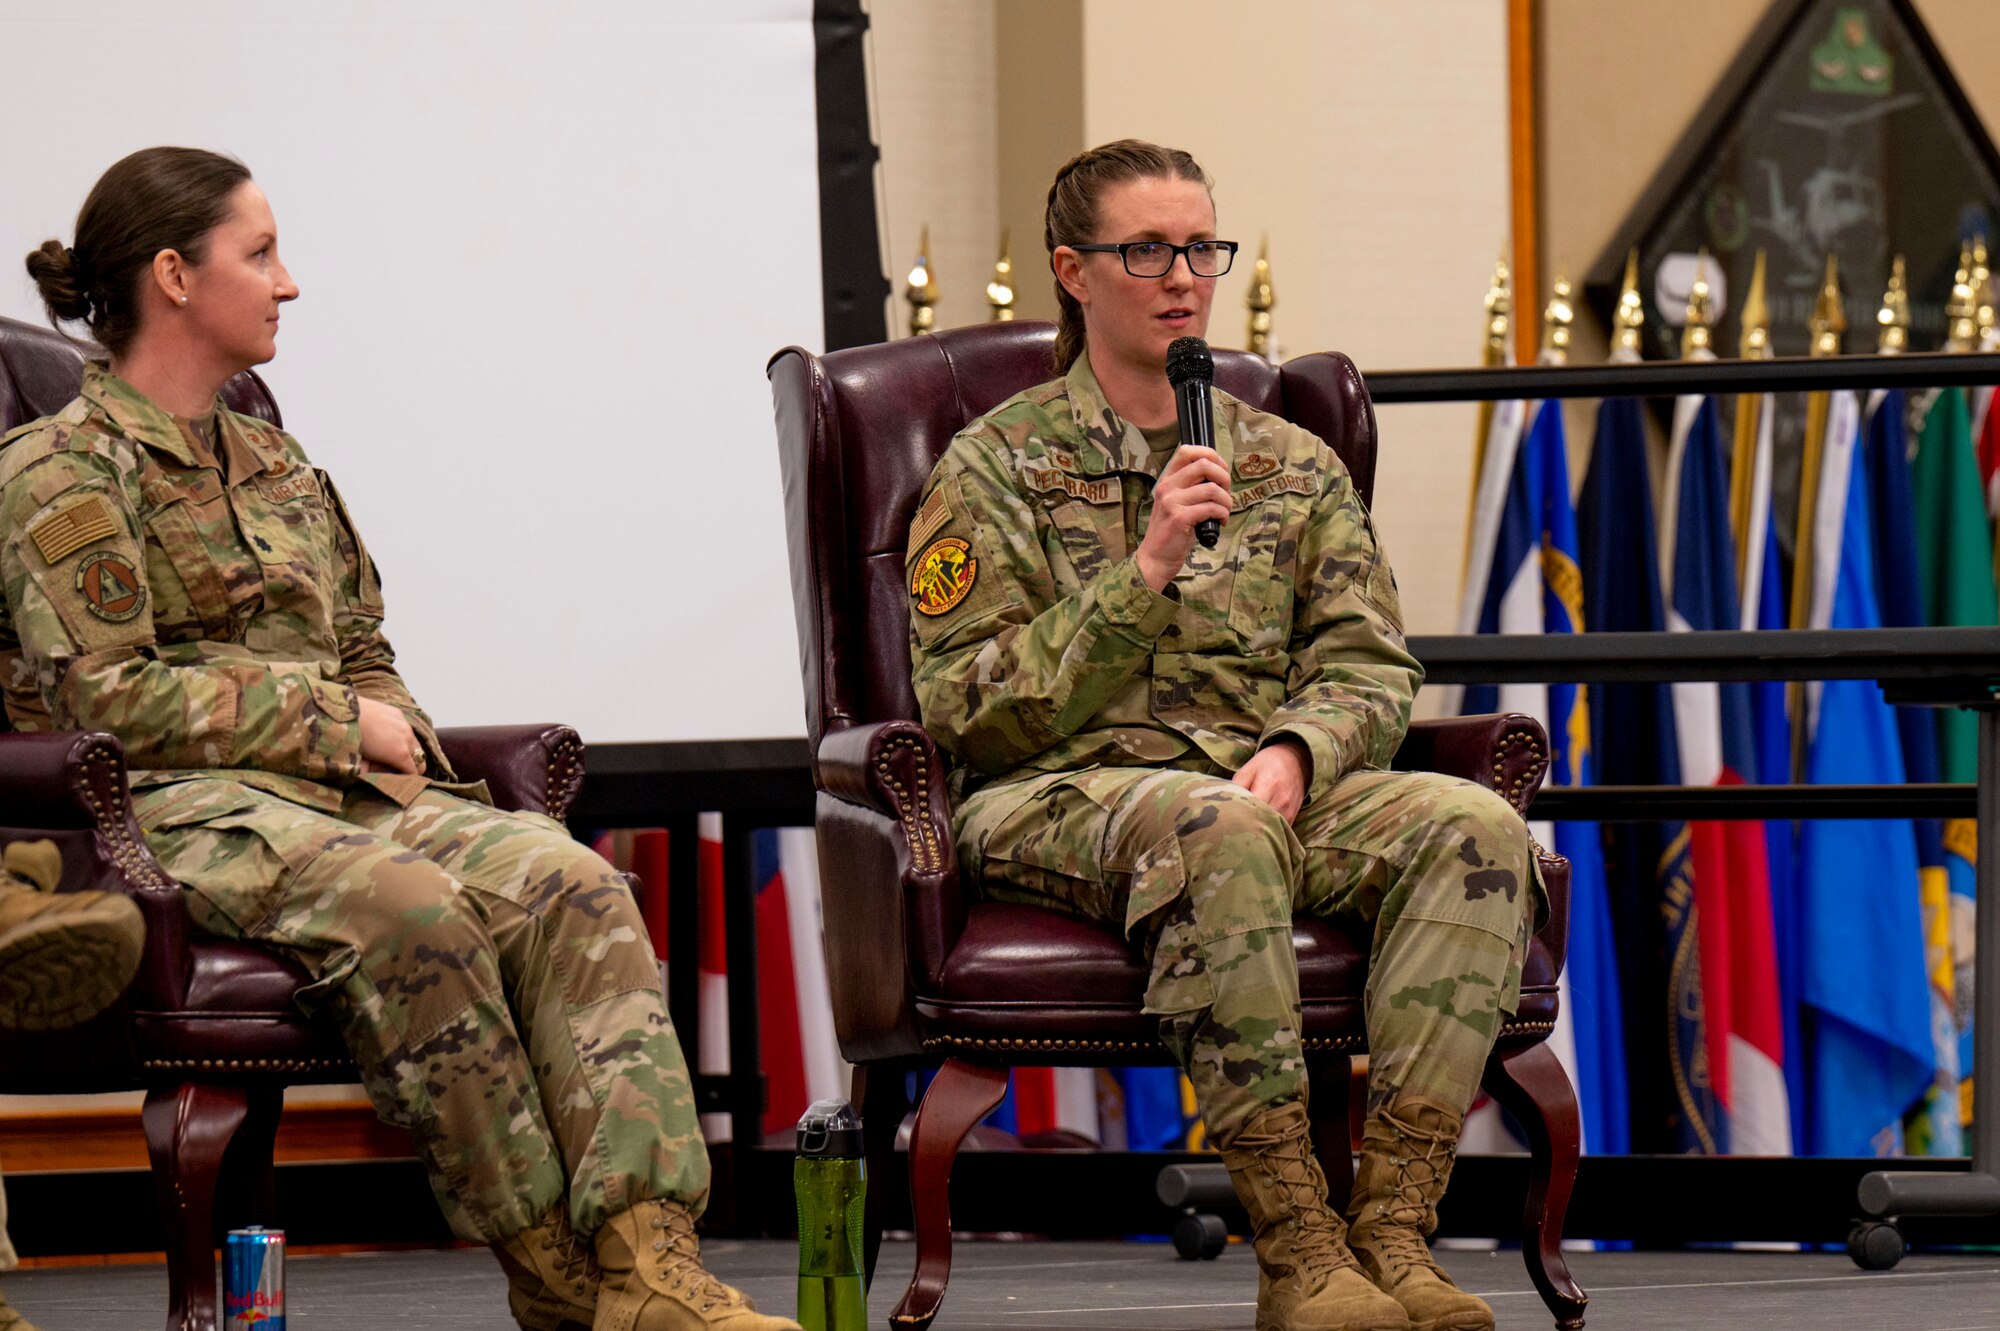 Lt. Col. Julie Roloson, 341st Security Forces Squadron commander, left, and Lt. Col. Corrie Pecoraro, 341st Force Support Squadron commander, speak at an all-female officers' panel during a women's leadership symposium March 21, 2023, at Malmstrom Air Force Base, Mont. Roloson and Pecoraro addressed topics to include combating burnout and strategies to focus on overall well-being. (U.S. Air Force photo by Airman Hannah Hardy)